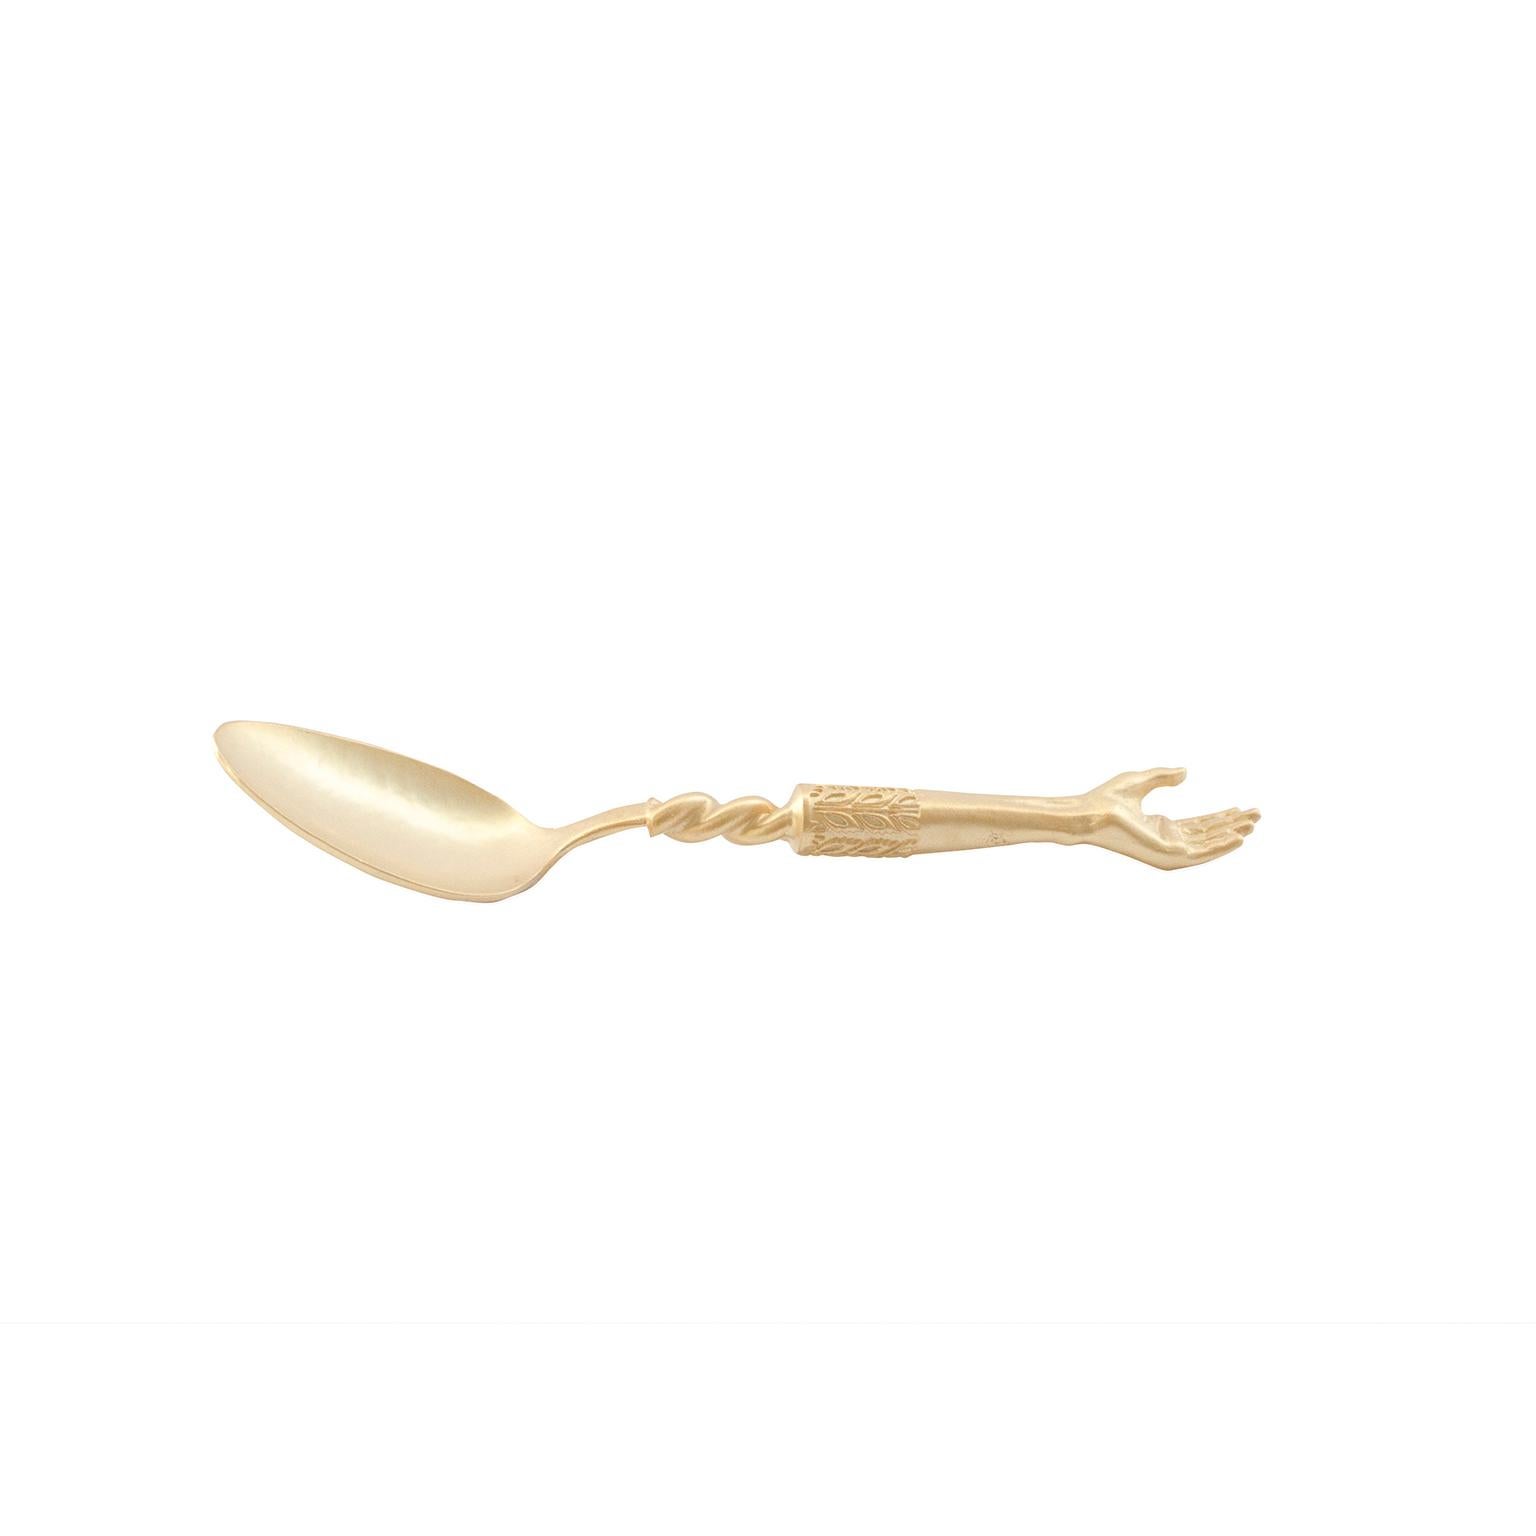 Set of 4 tea spoons elaborated in brass and 18-carat gold-plated.
from the collection Joyas en casa ‘Joyas en casa’ which means “Gems at home” is a table ware and bowls collection that bring strong 'sculptural' feelings to everyday objects; with